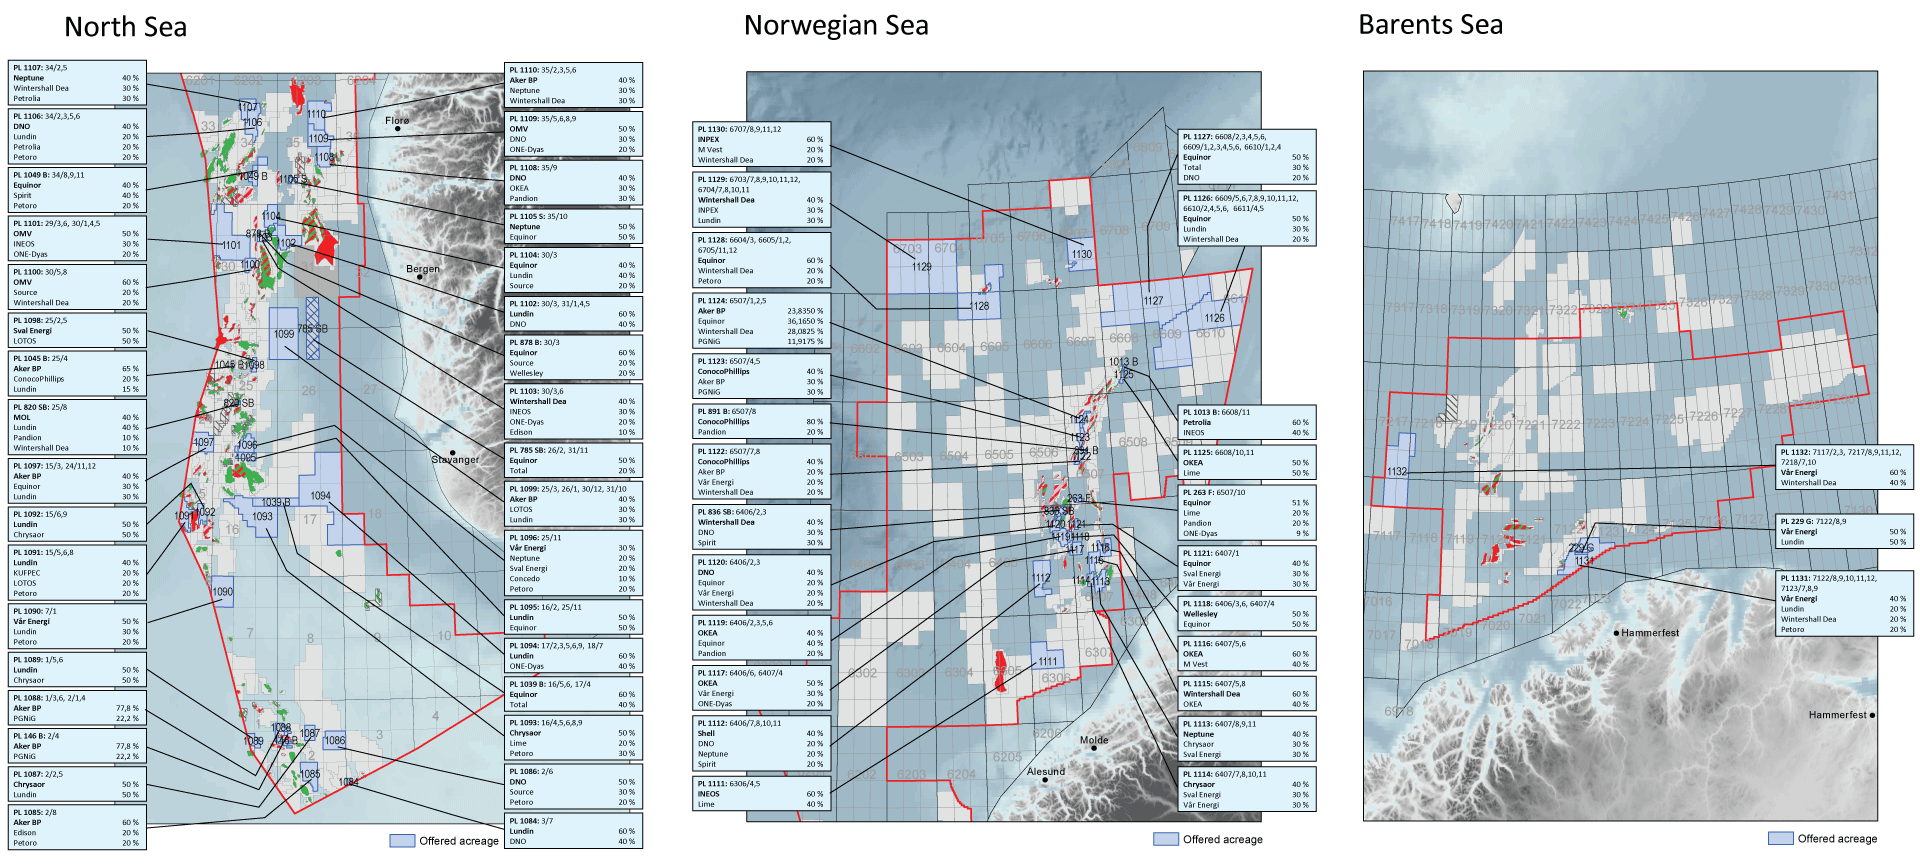 Licensing position and recent rounds - Norwegianpetroleum.no